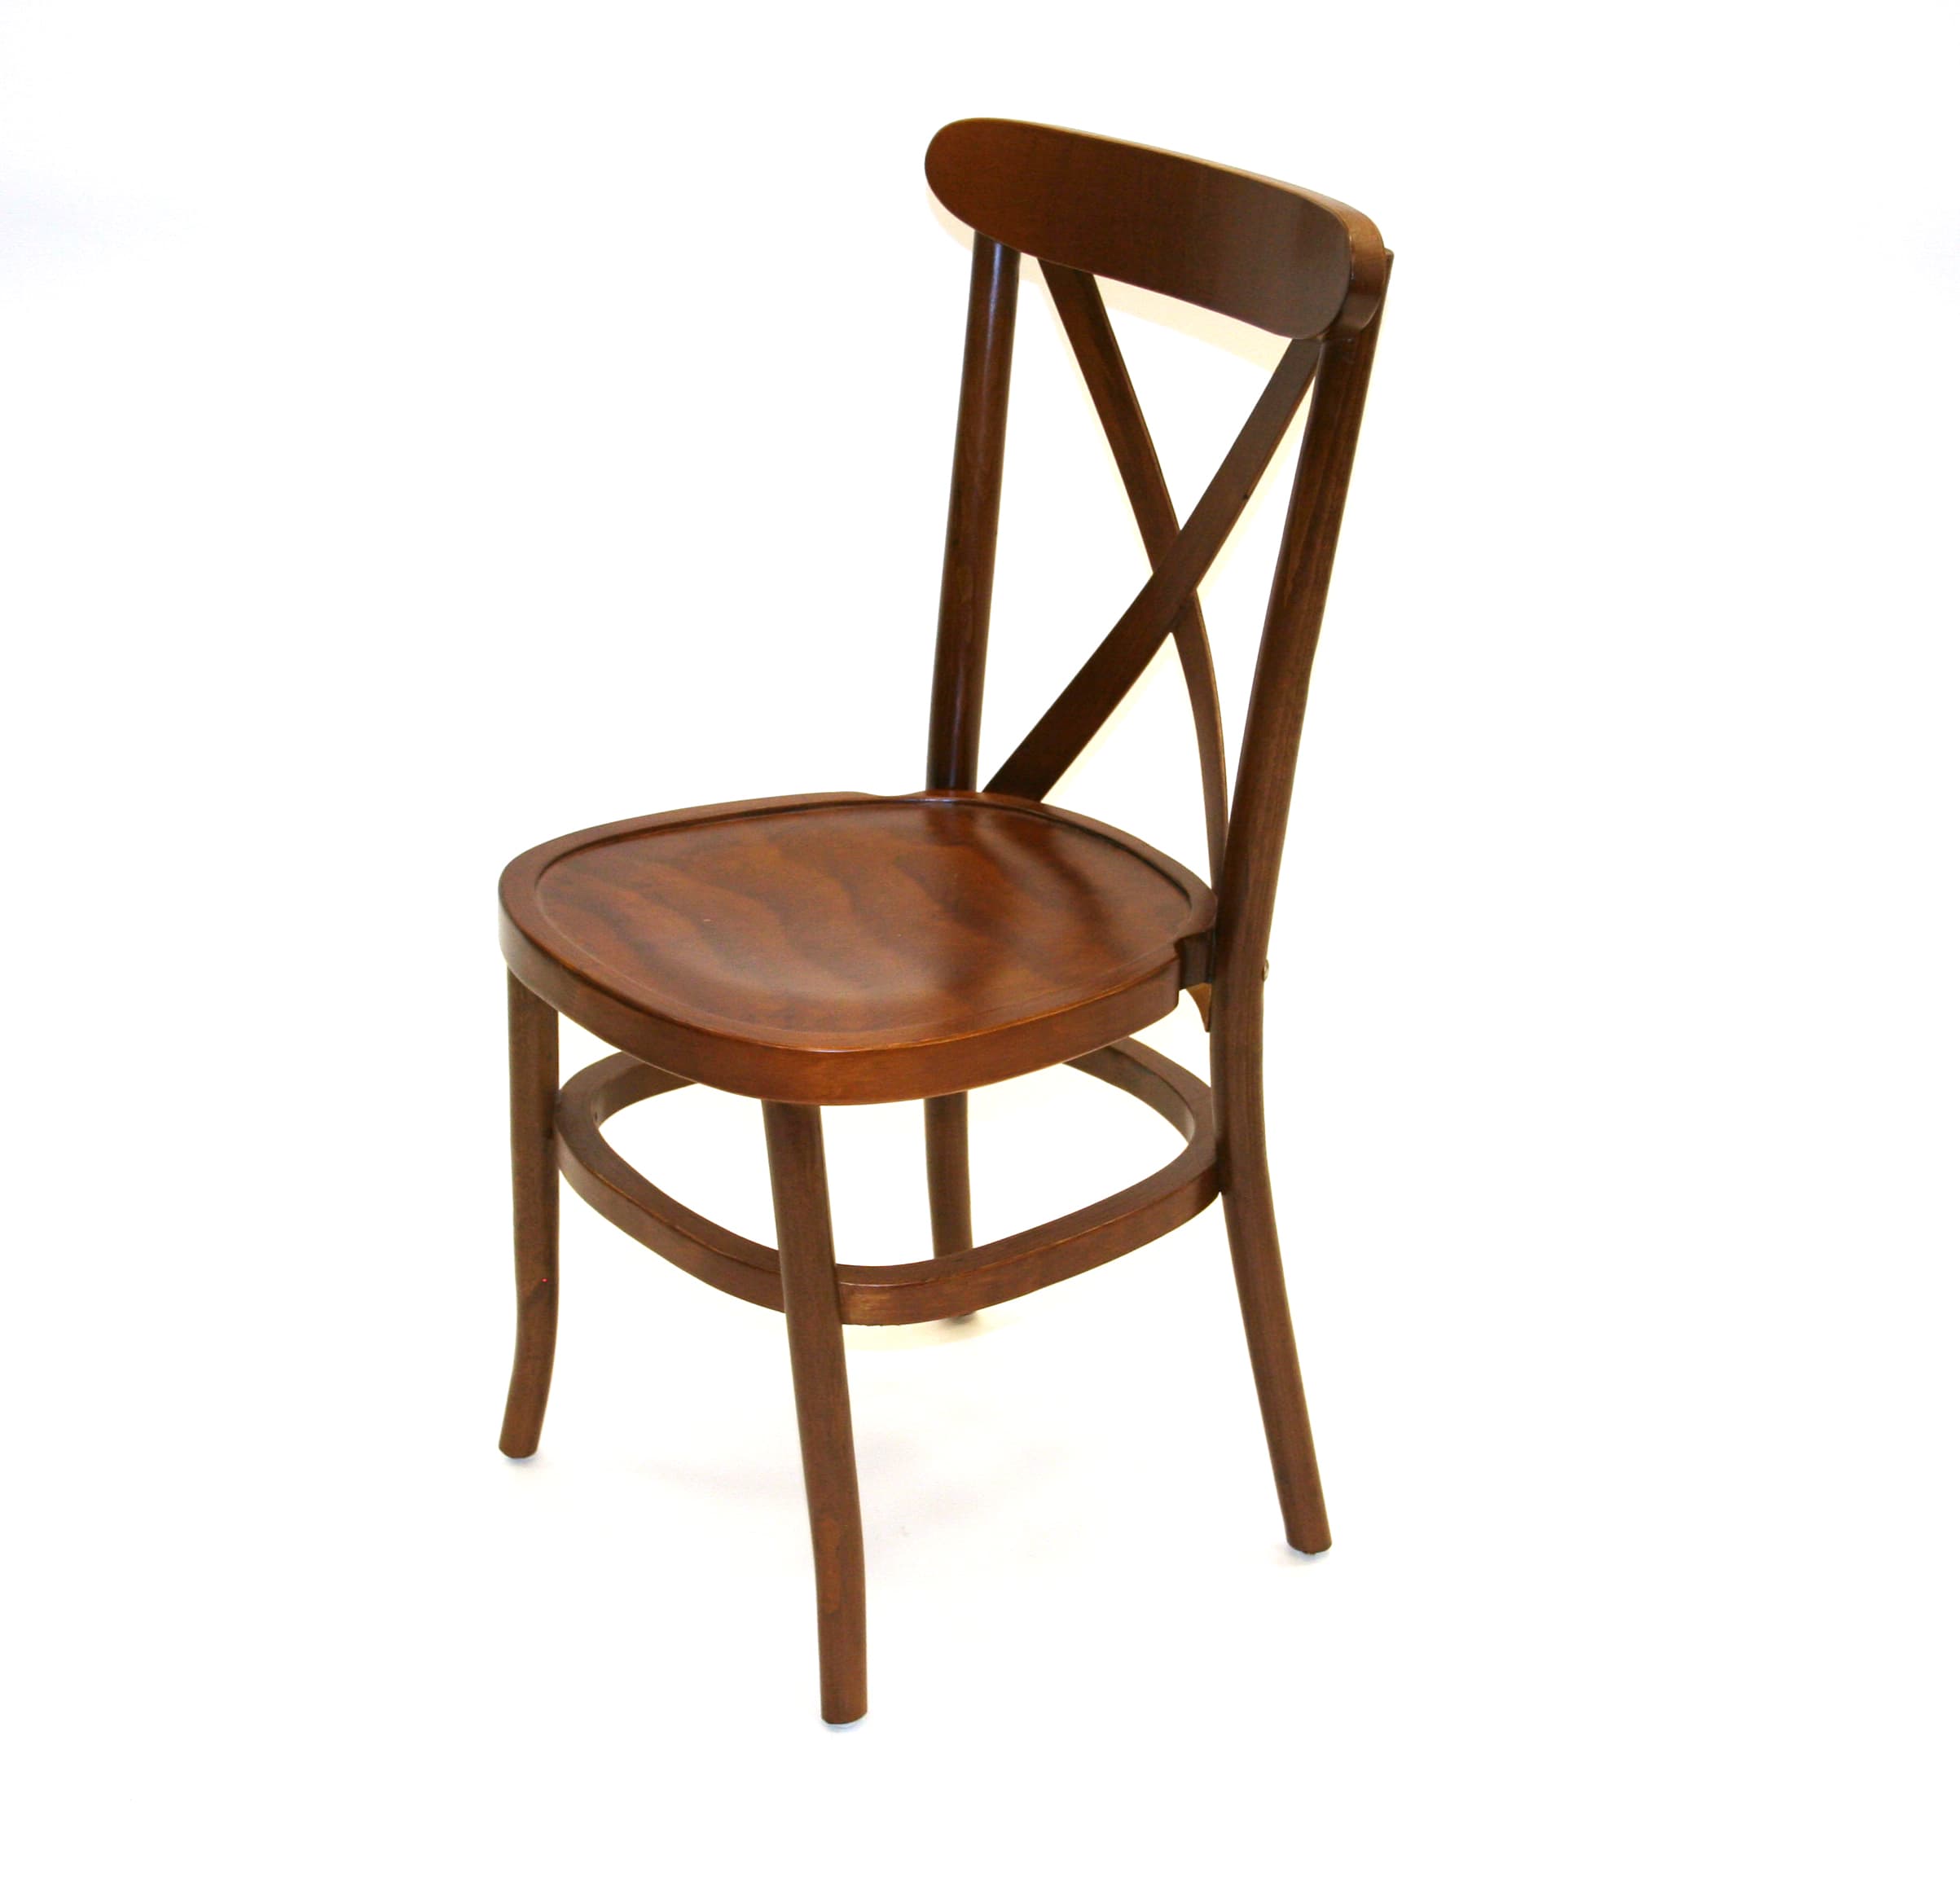 traditional cross back wooden chairs